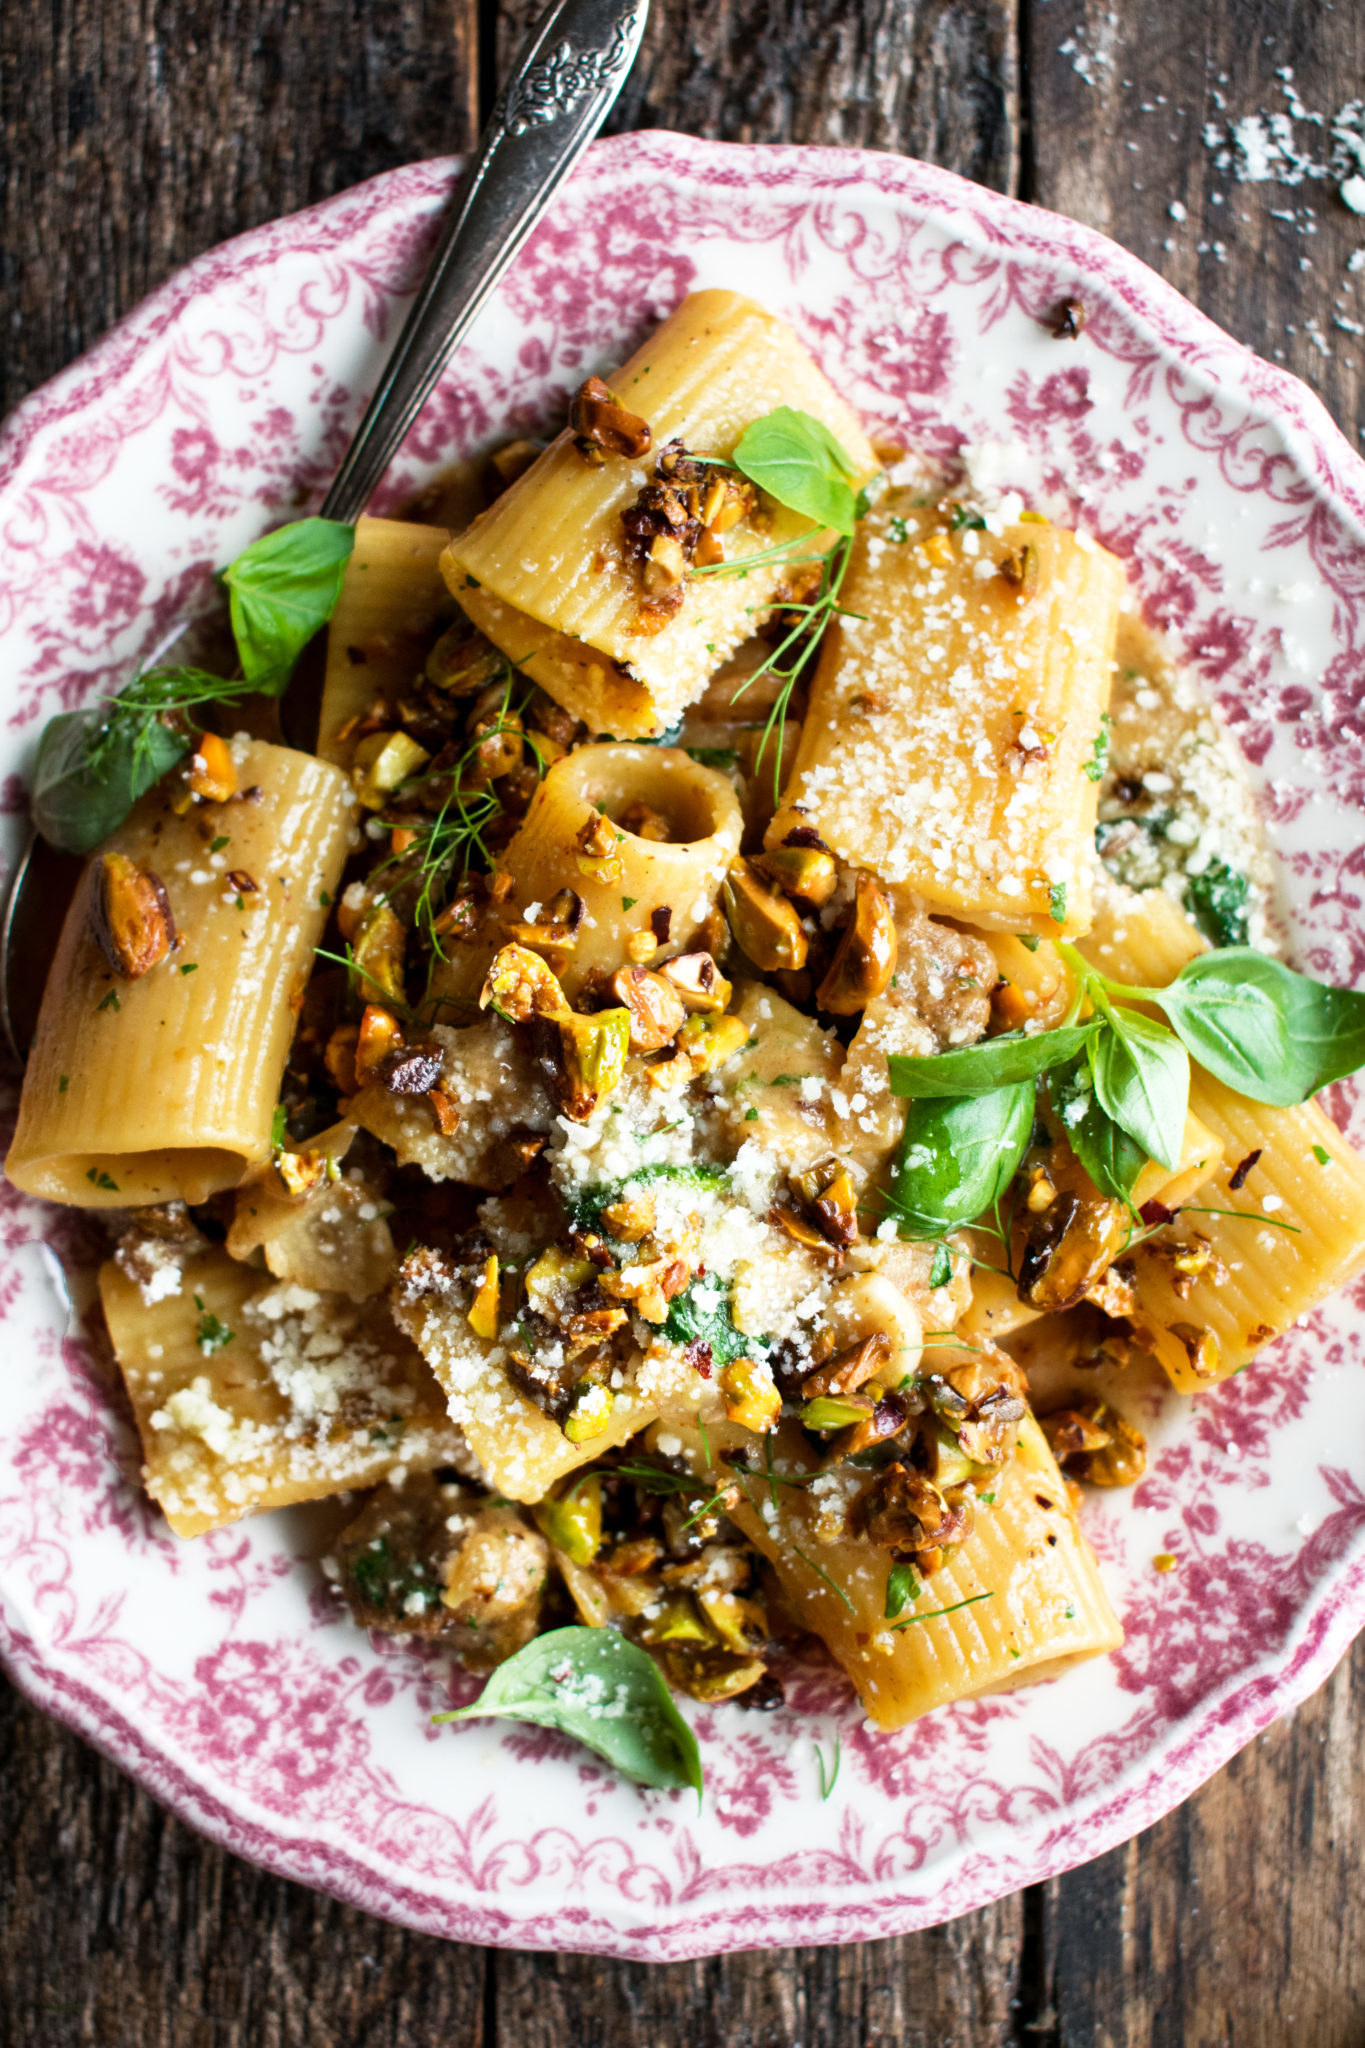 A plate of rigatoni with sausage